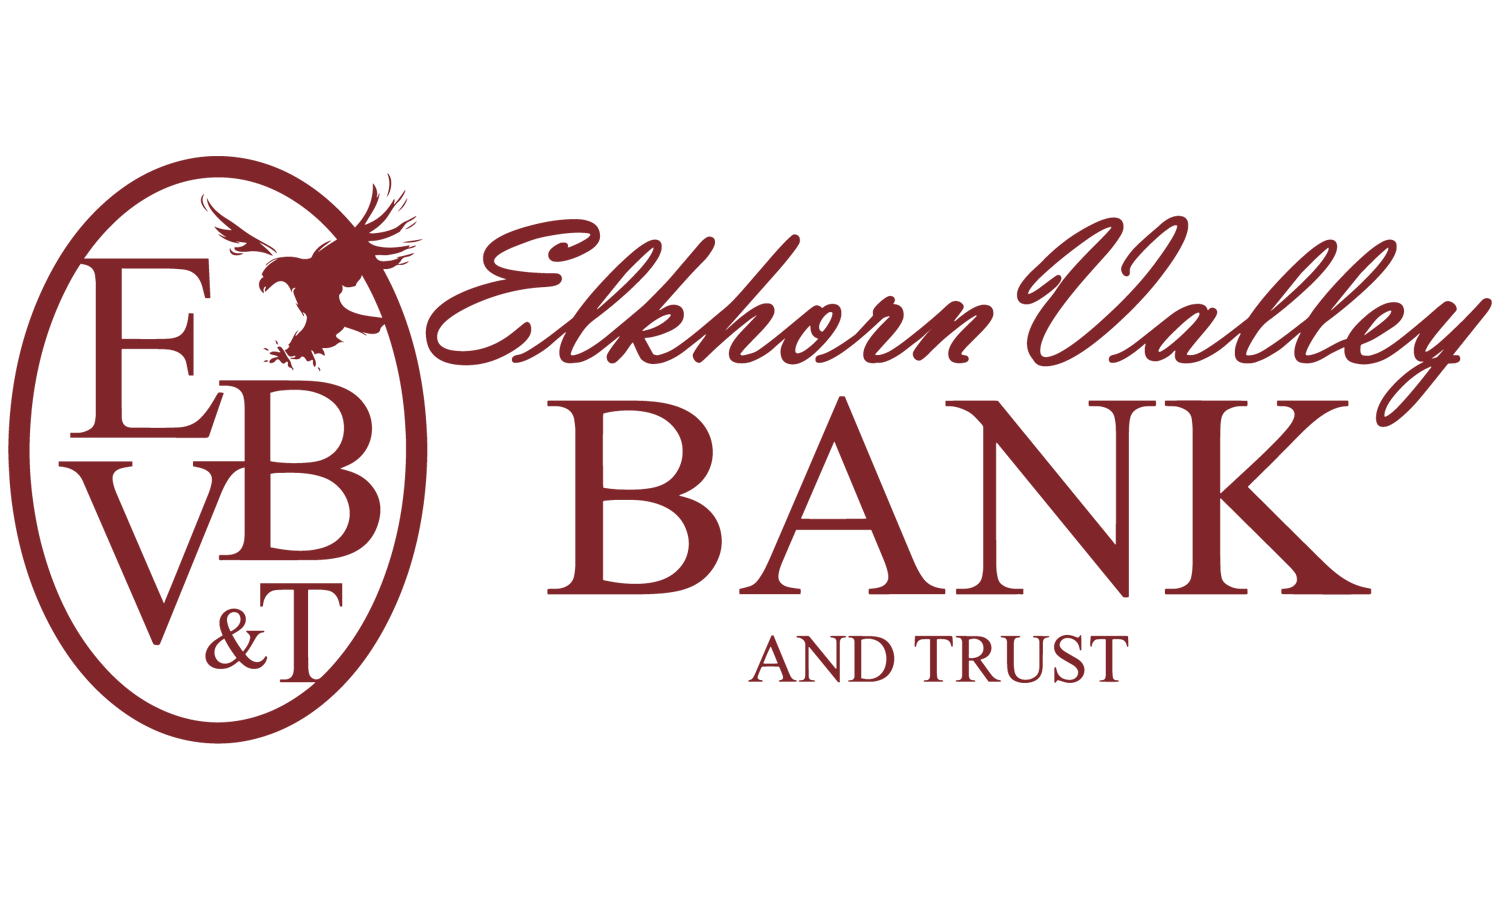 Elkhorn Valley Bank and Trust